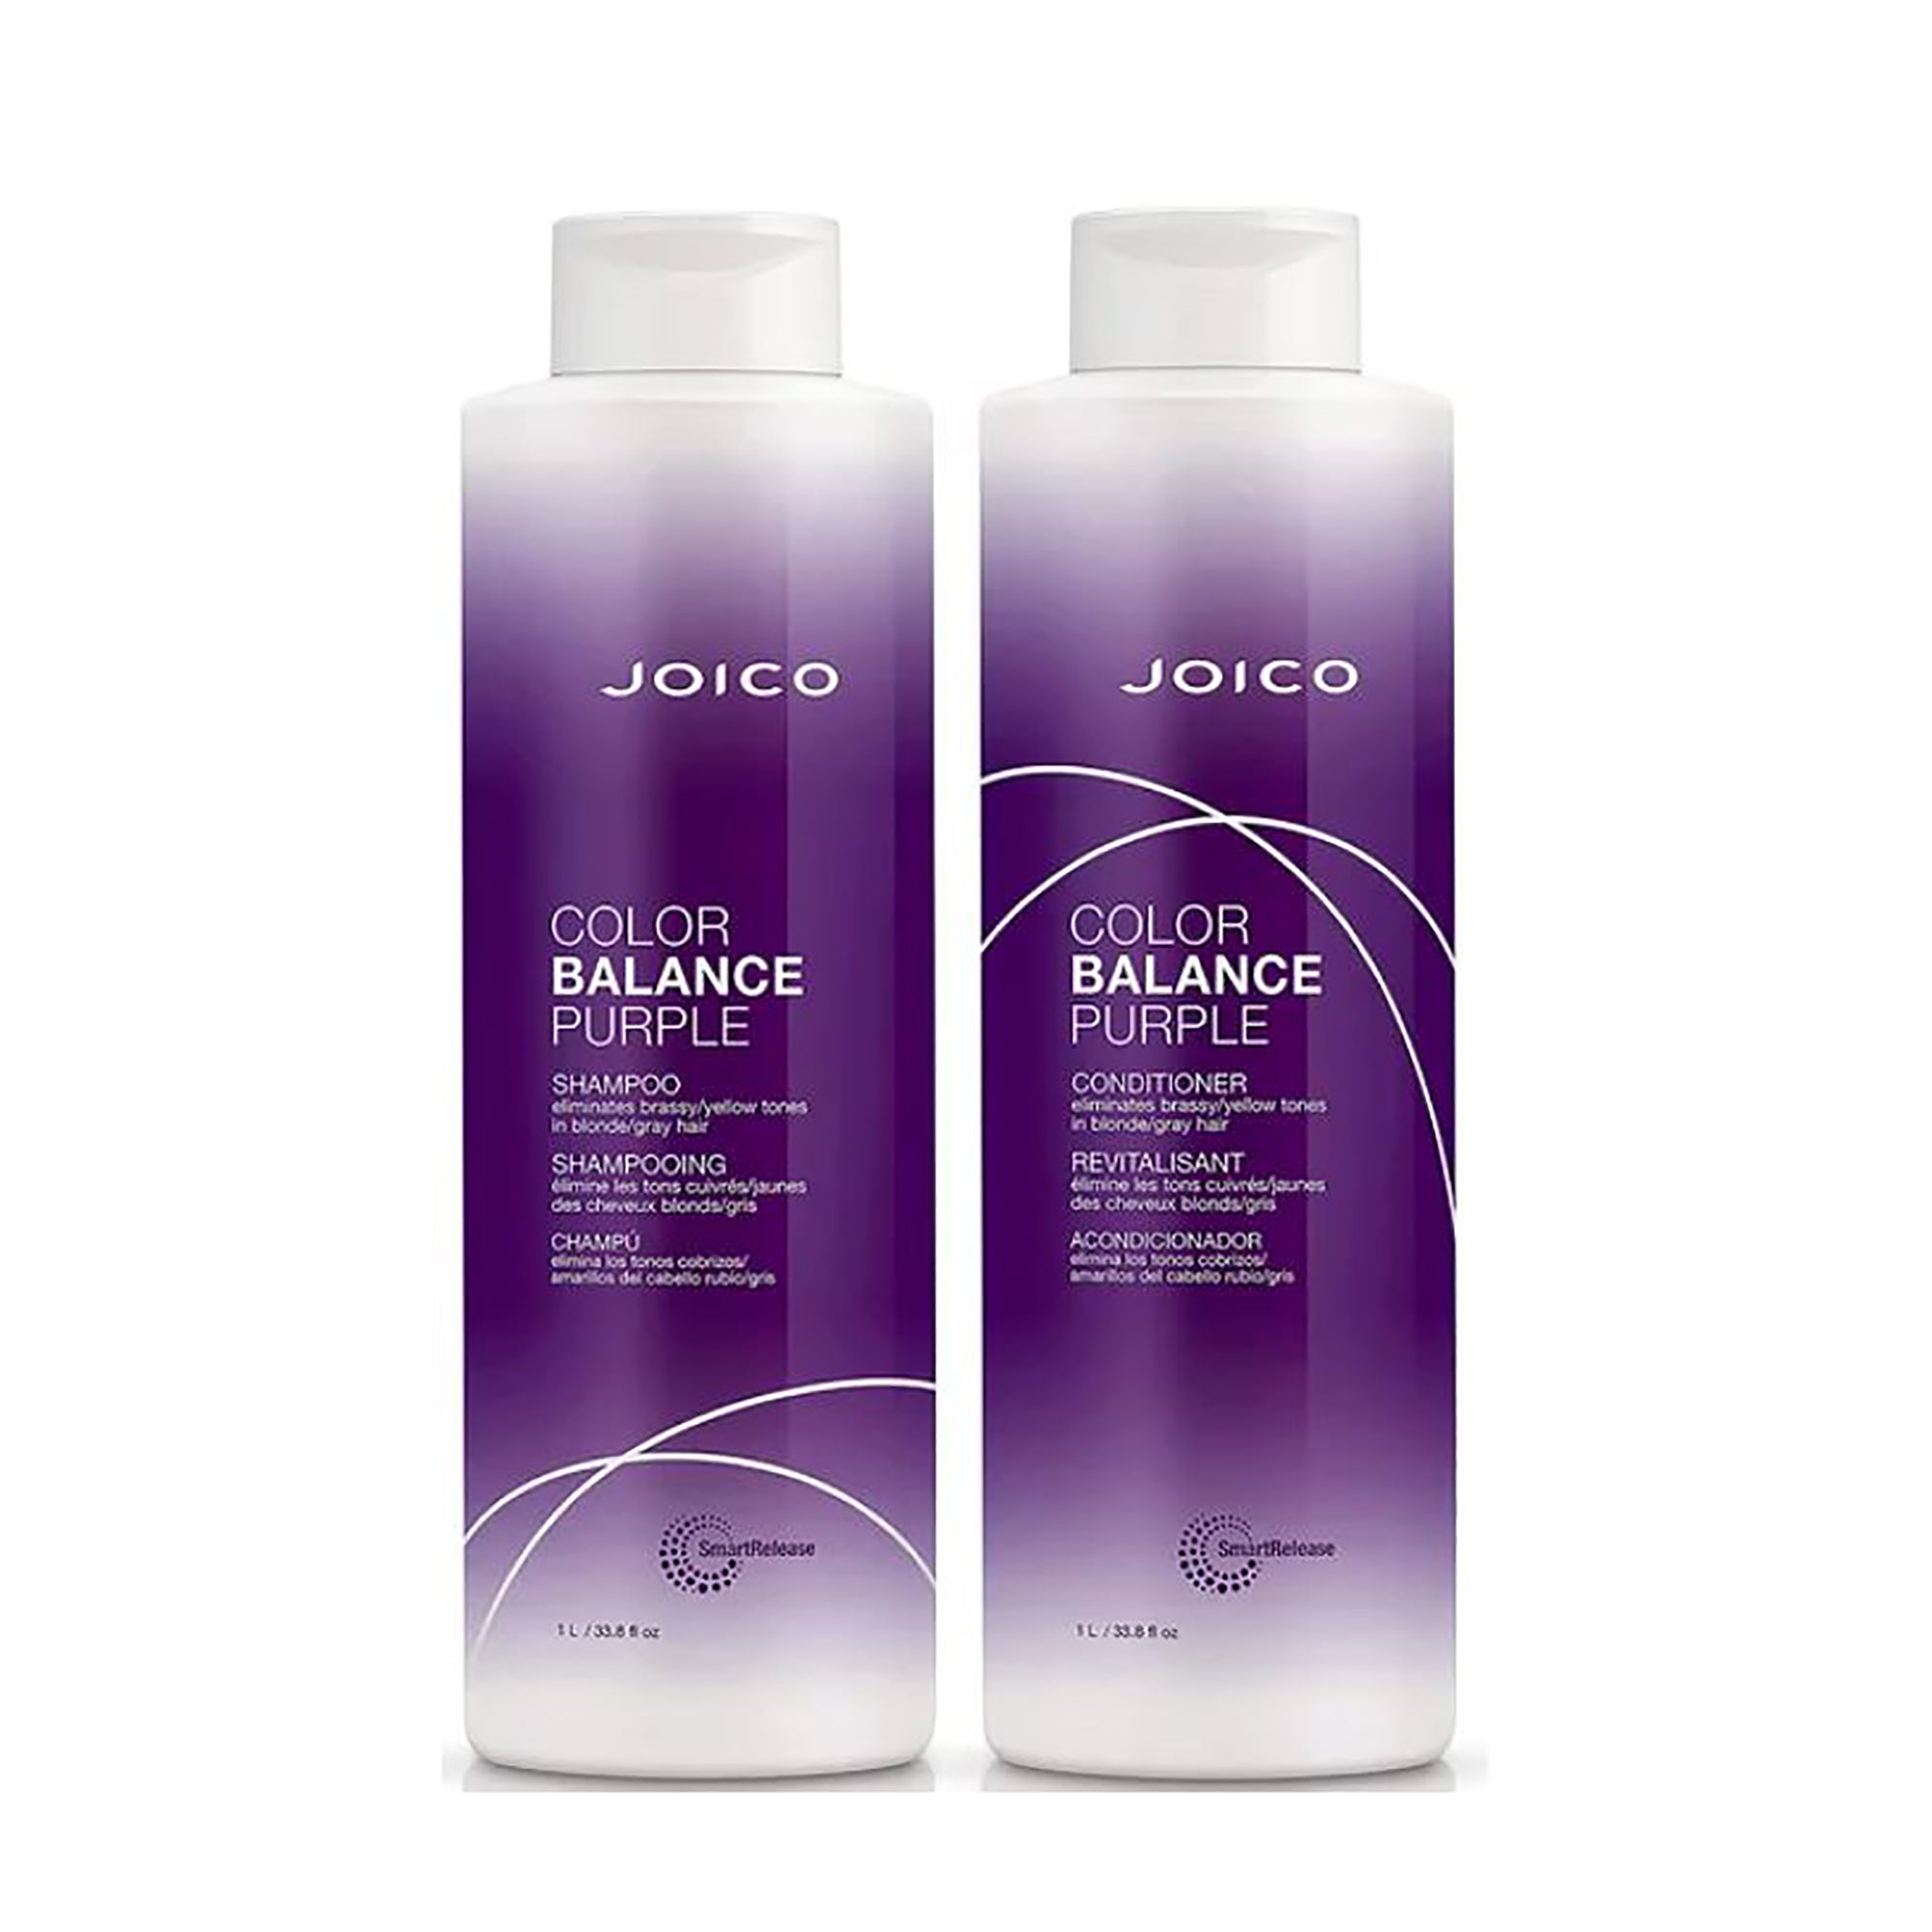 Joico Color Balancing Purple Shampoo and Conditioner LITER DUO ($80 VALUE) / 33.OZ